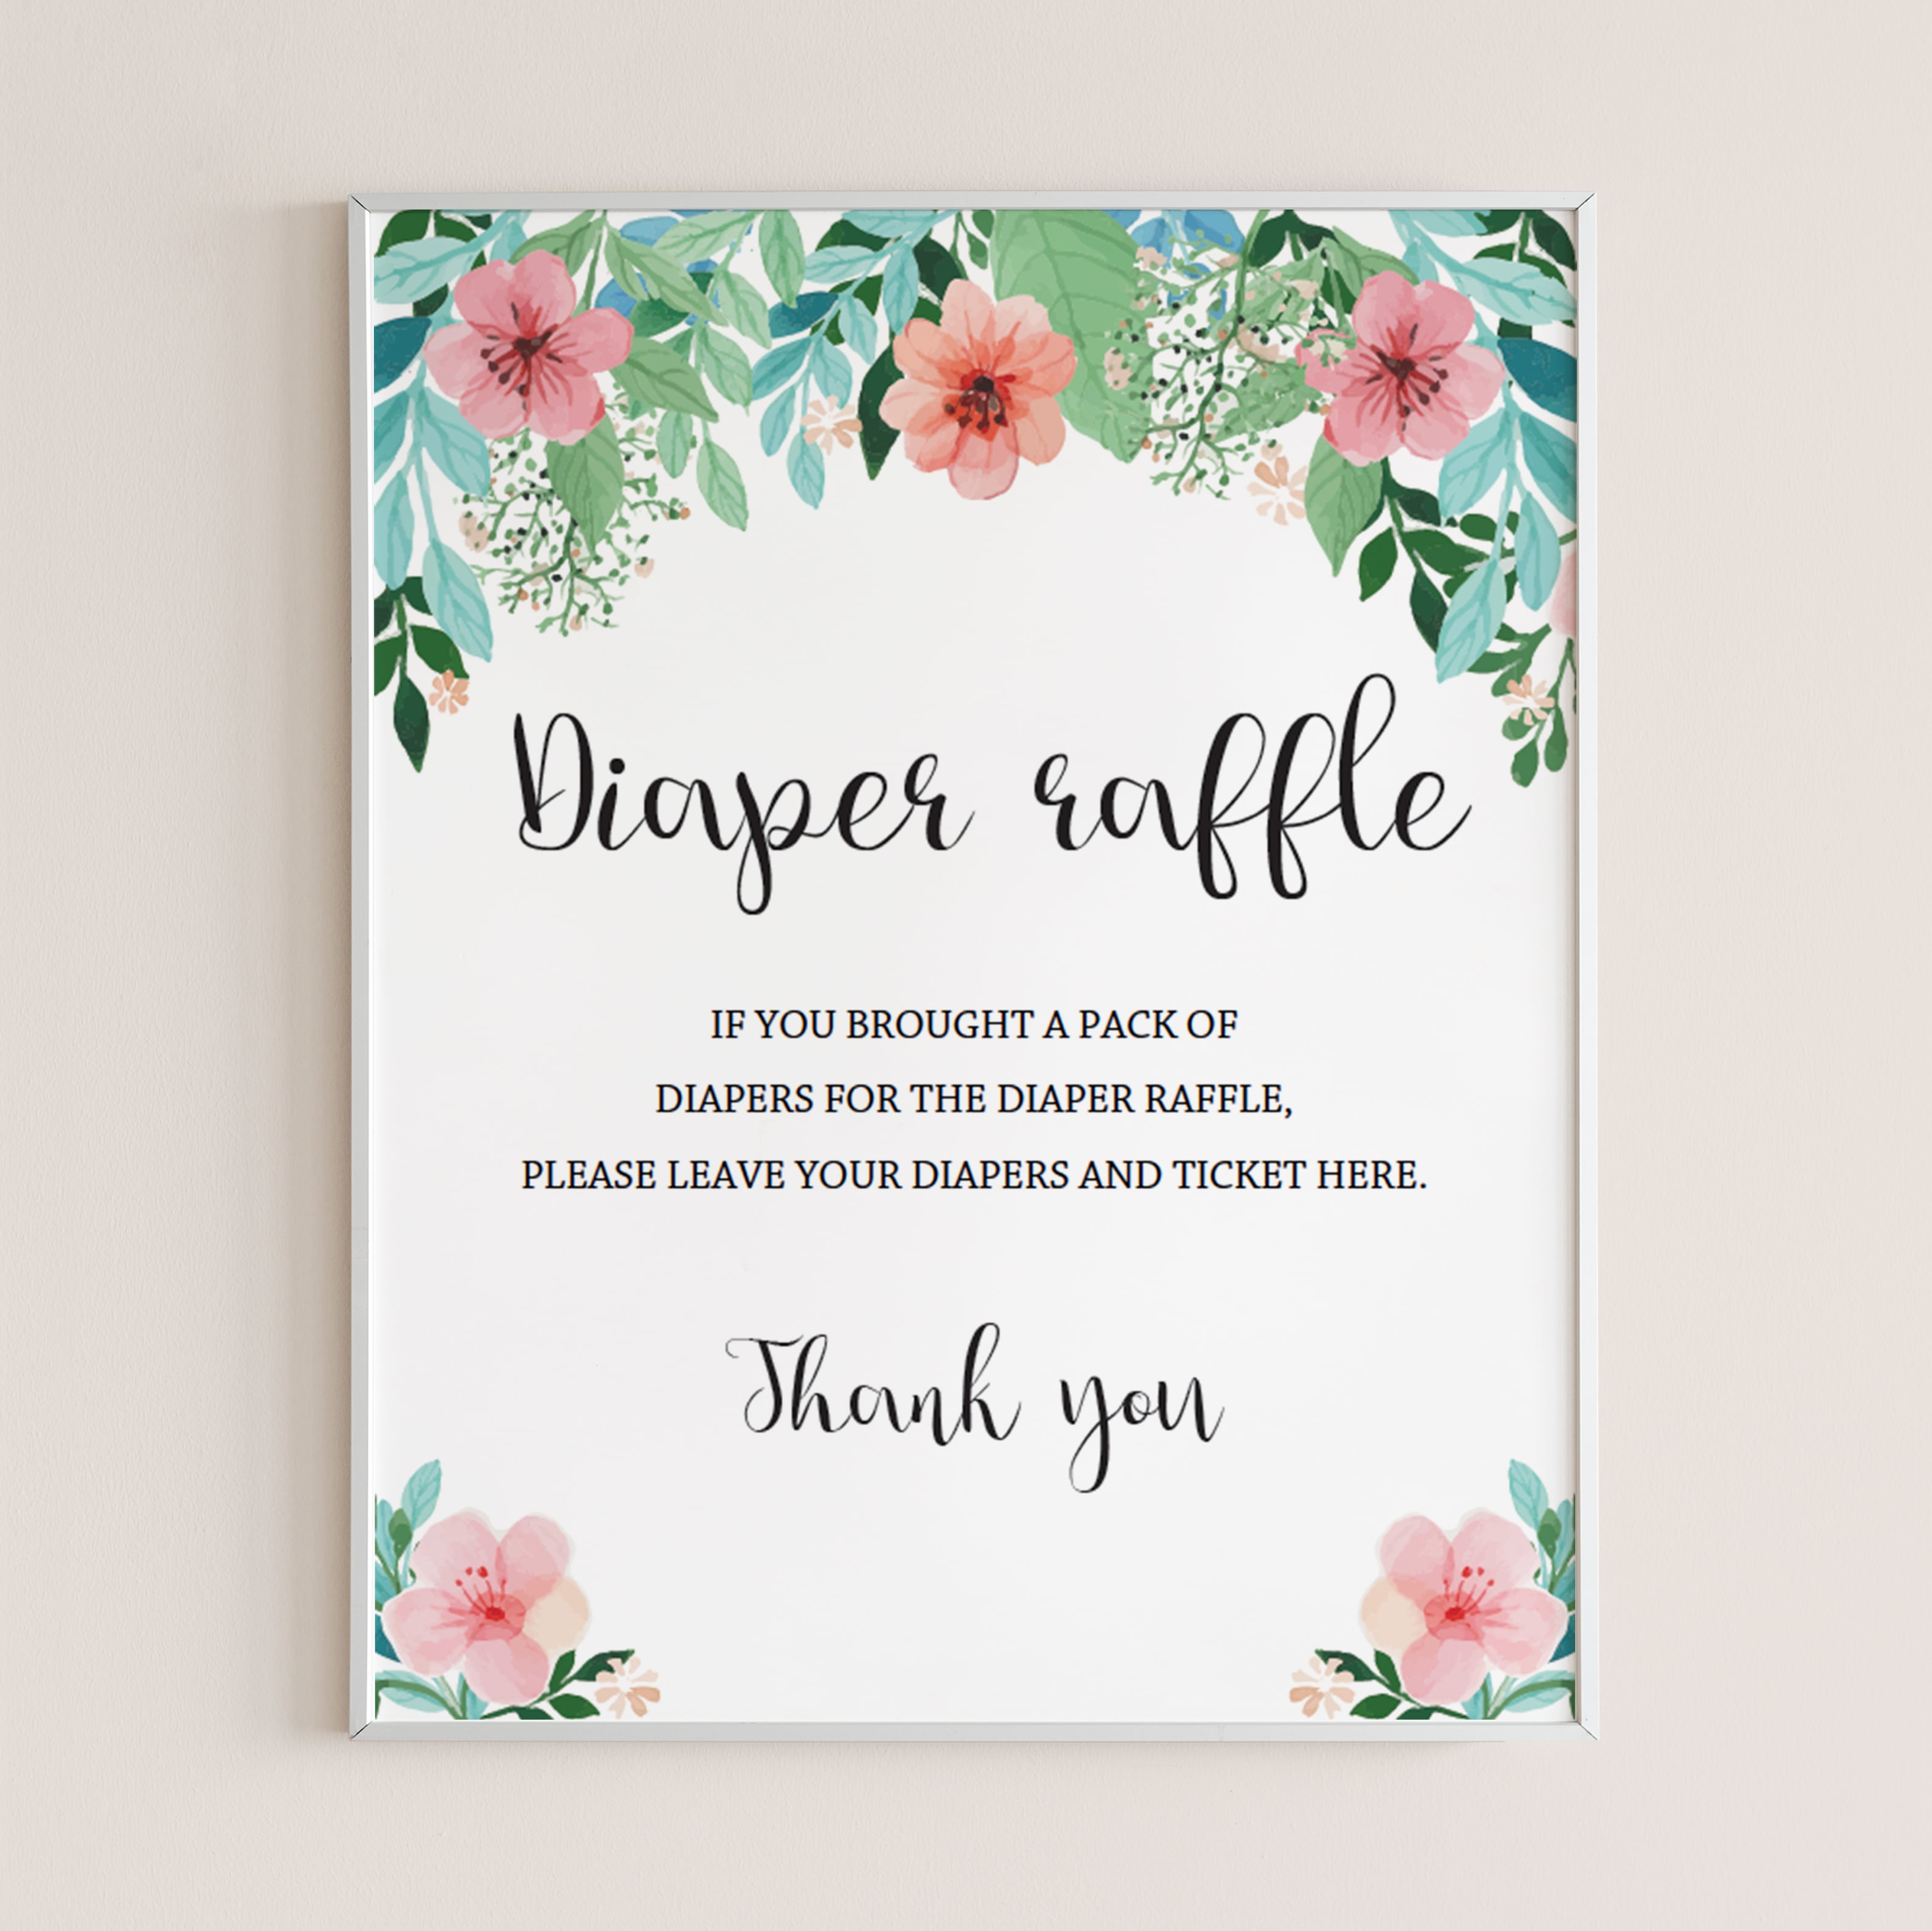 Diaper raffle sign for floral shower by LittleSizzle